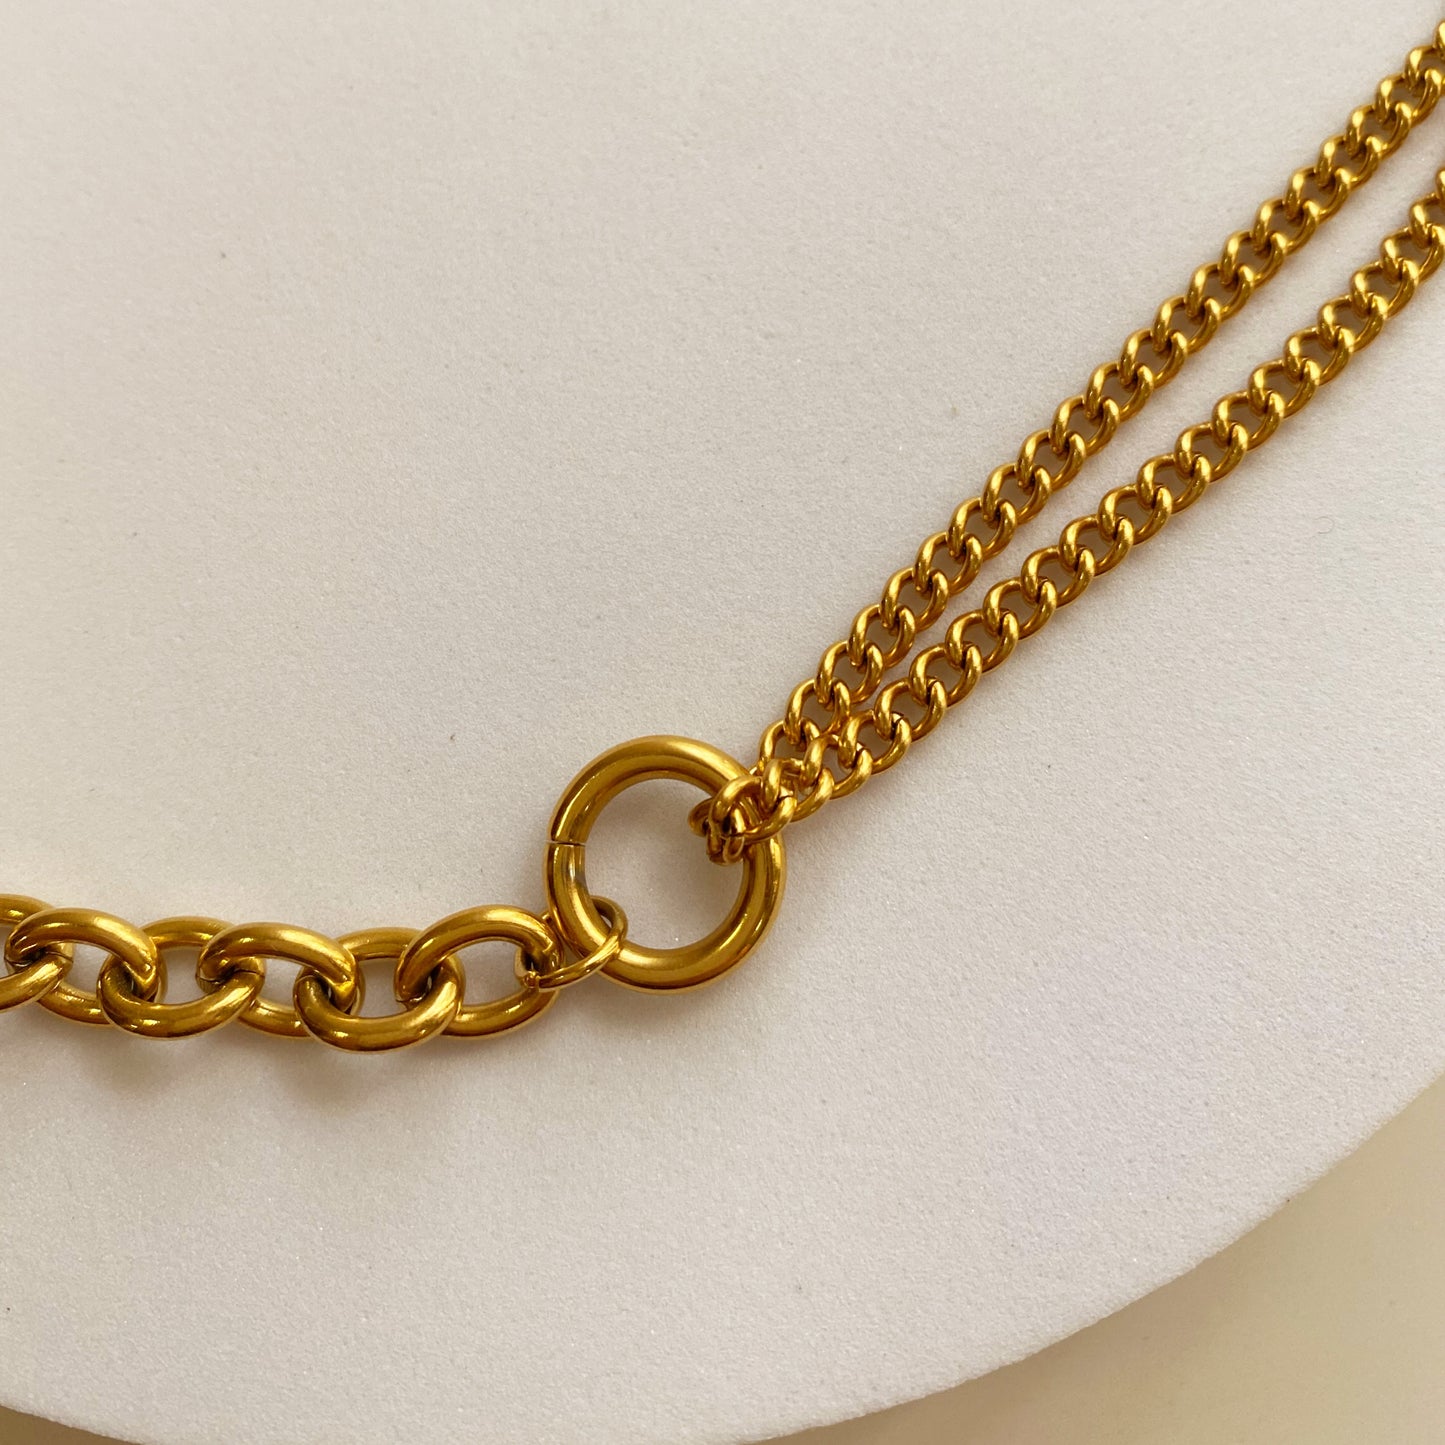 Linked Chains Necklace